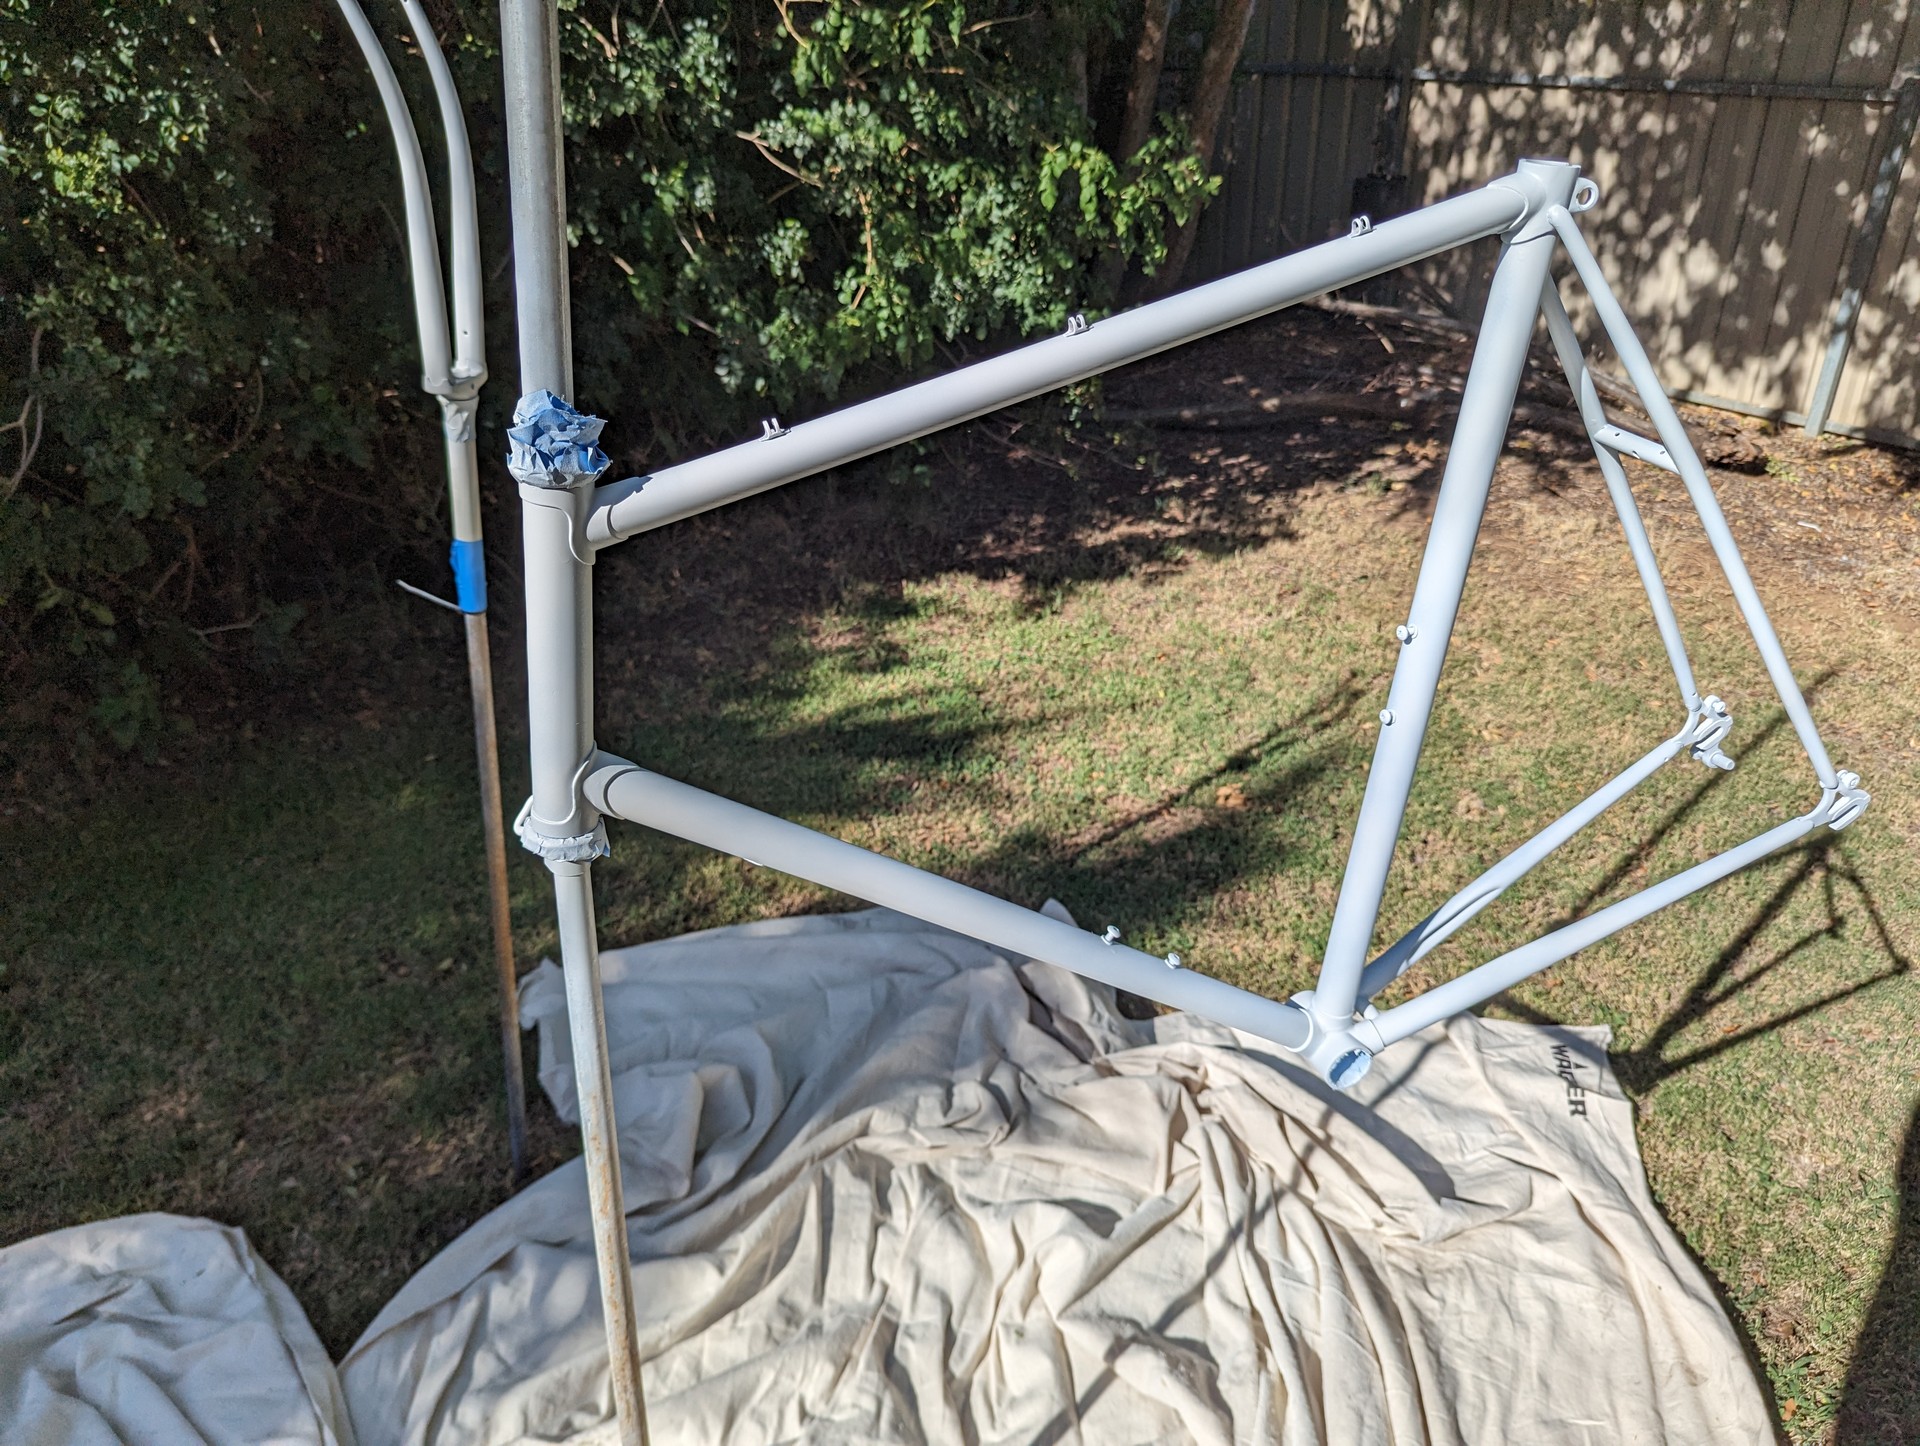 Bike frame that&rsquo;s been sprayed with white primer